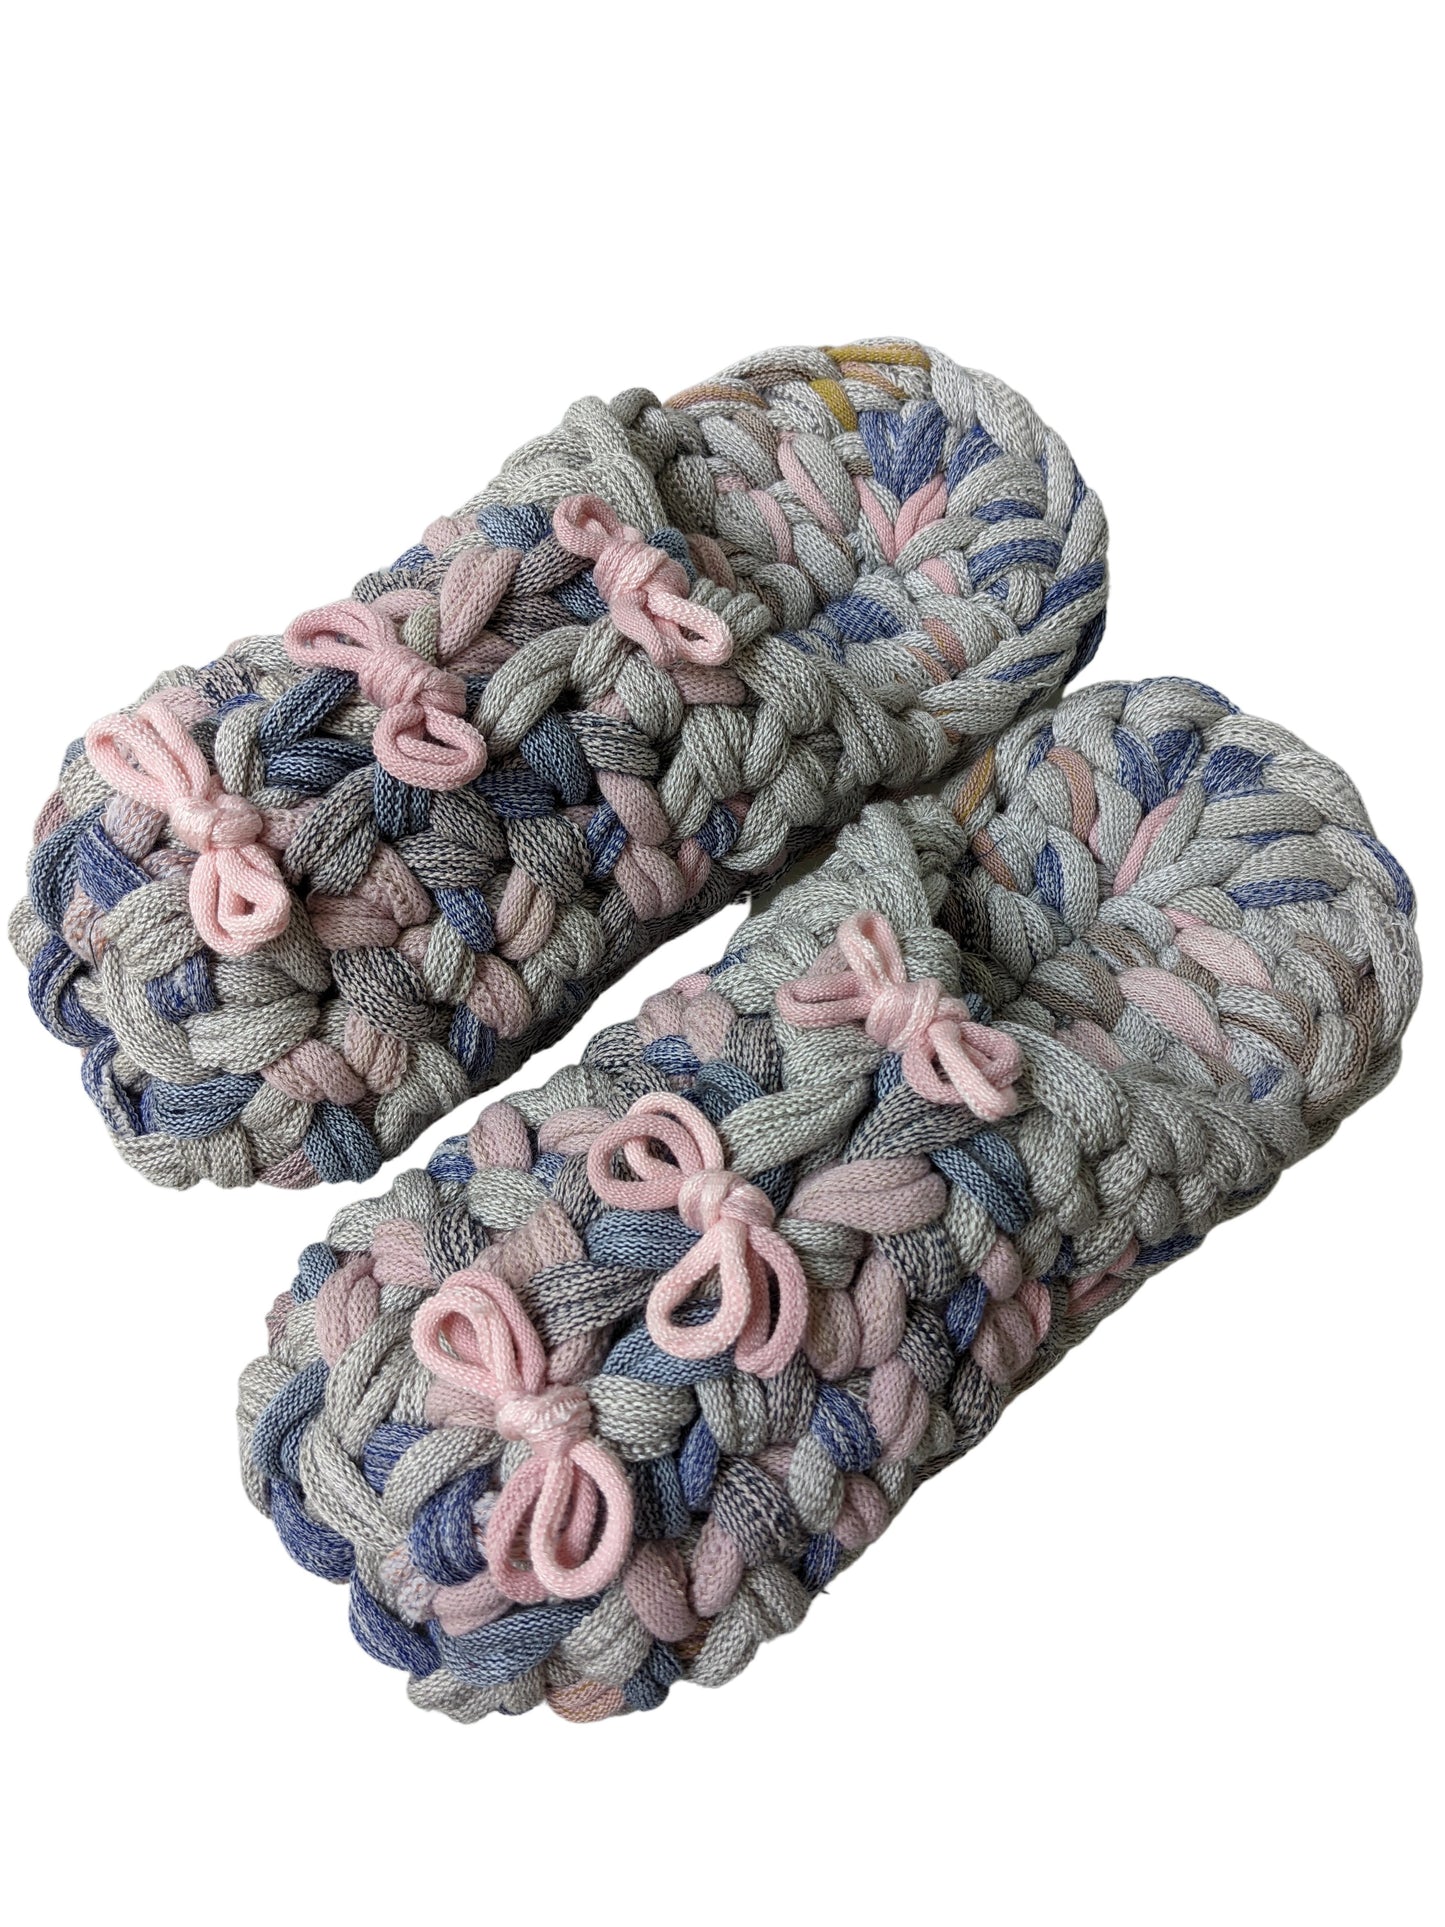 Large | Knit upcycle slippers 2022-L76 [Large]